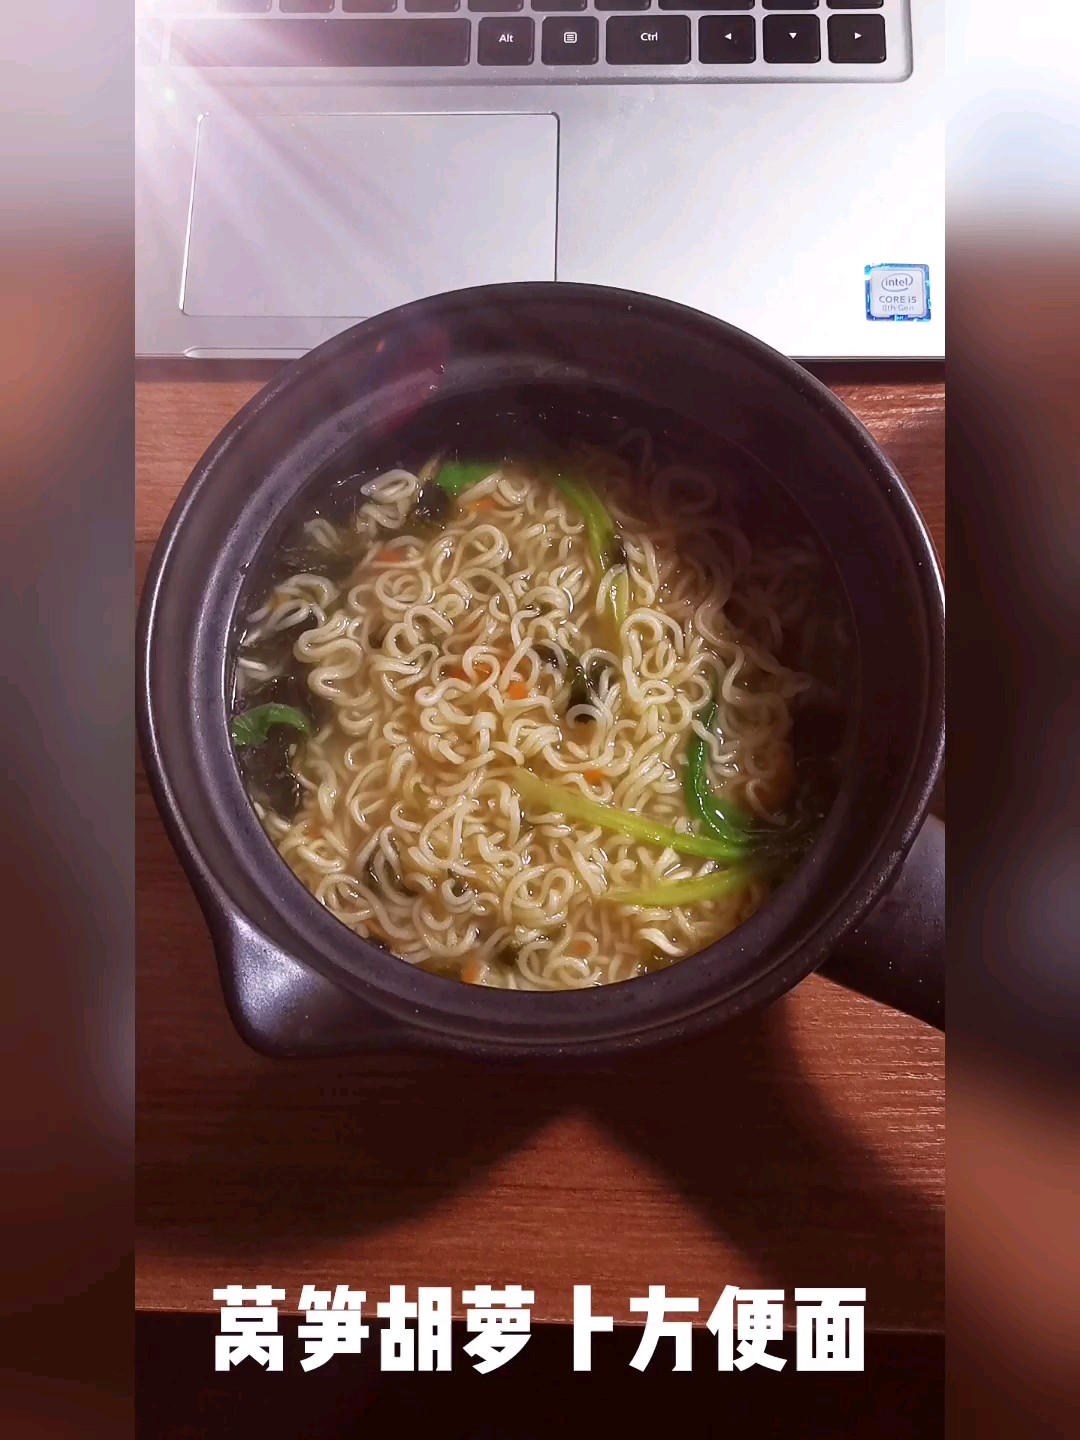 Instant Noodles with Lettuce and Carrot recipe